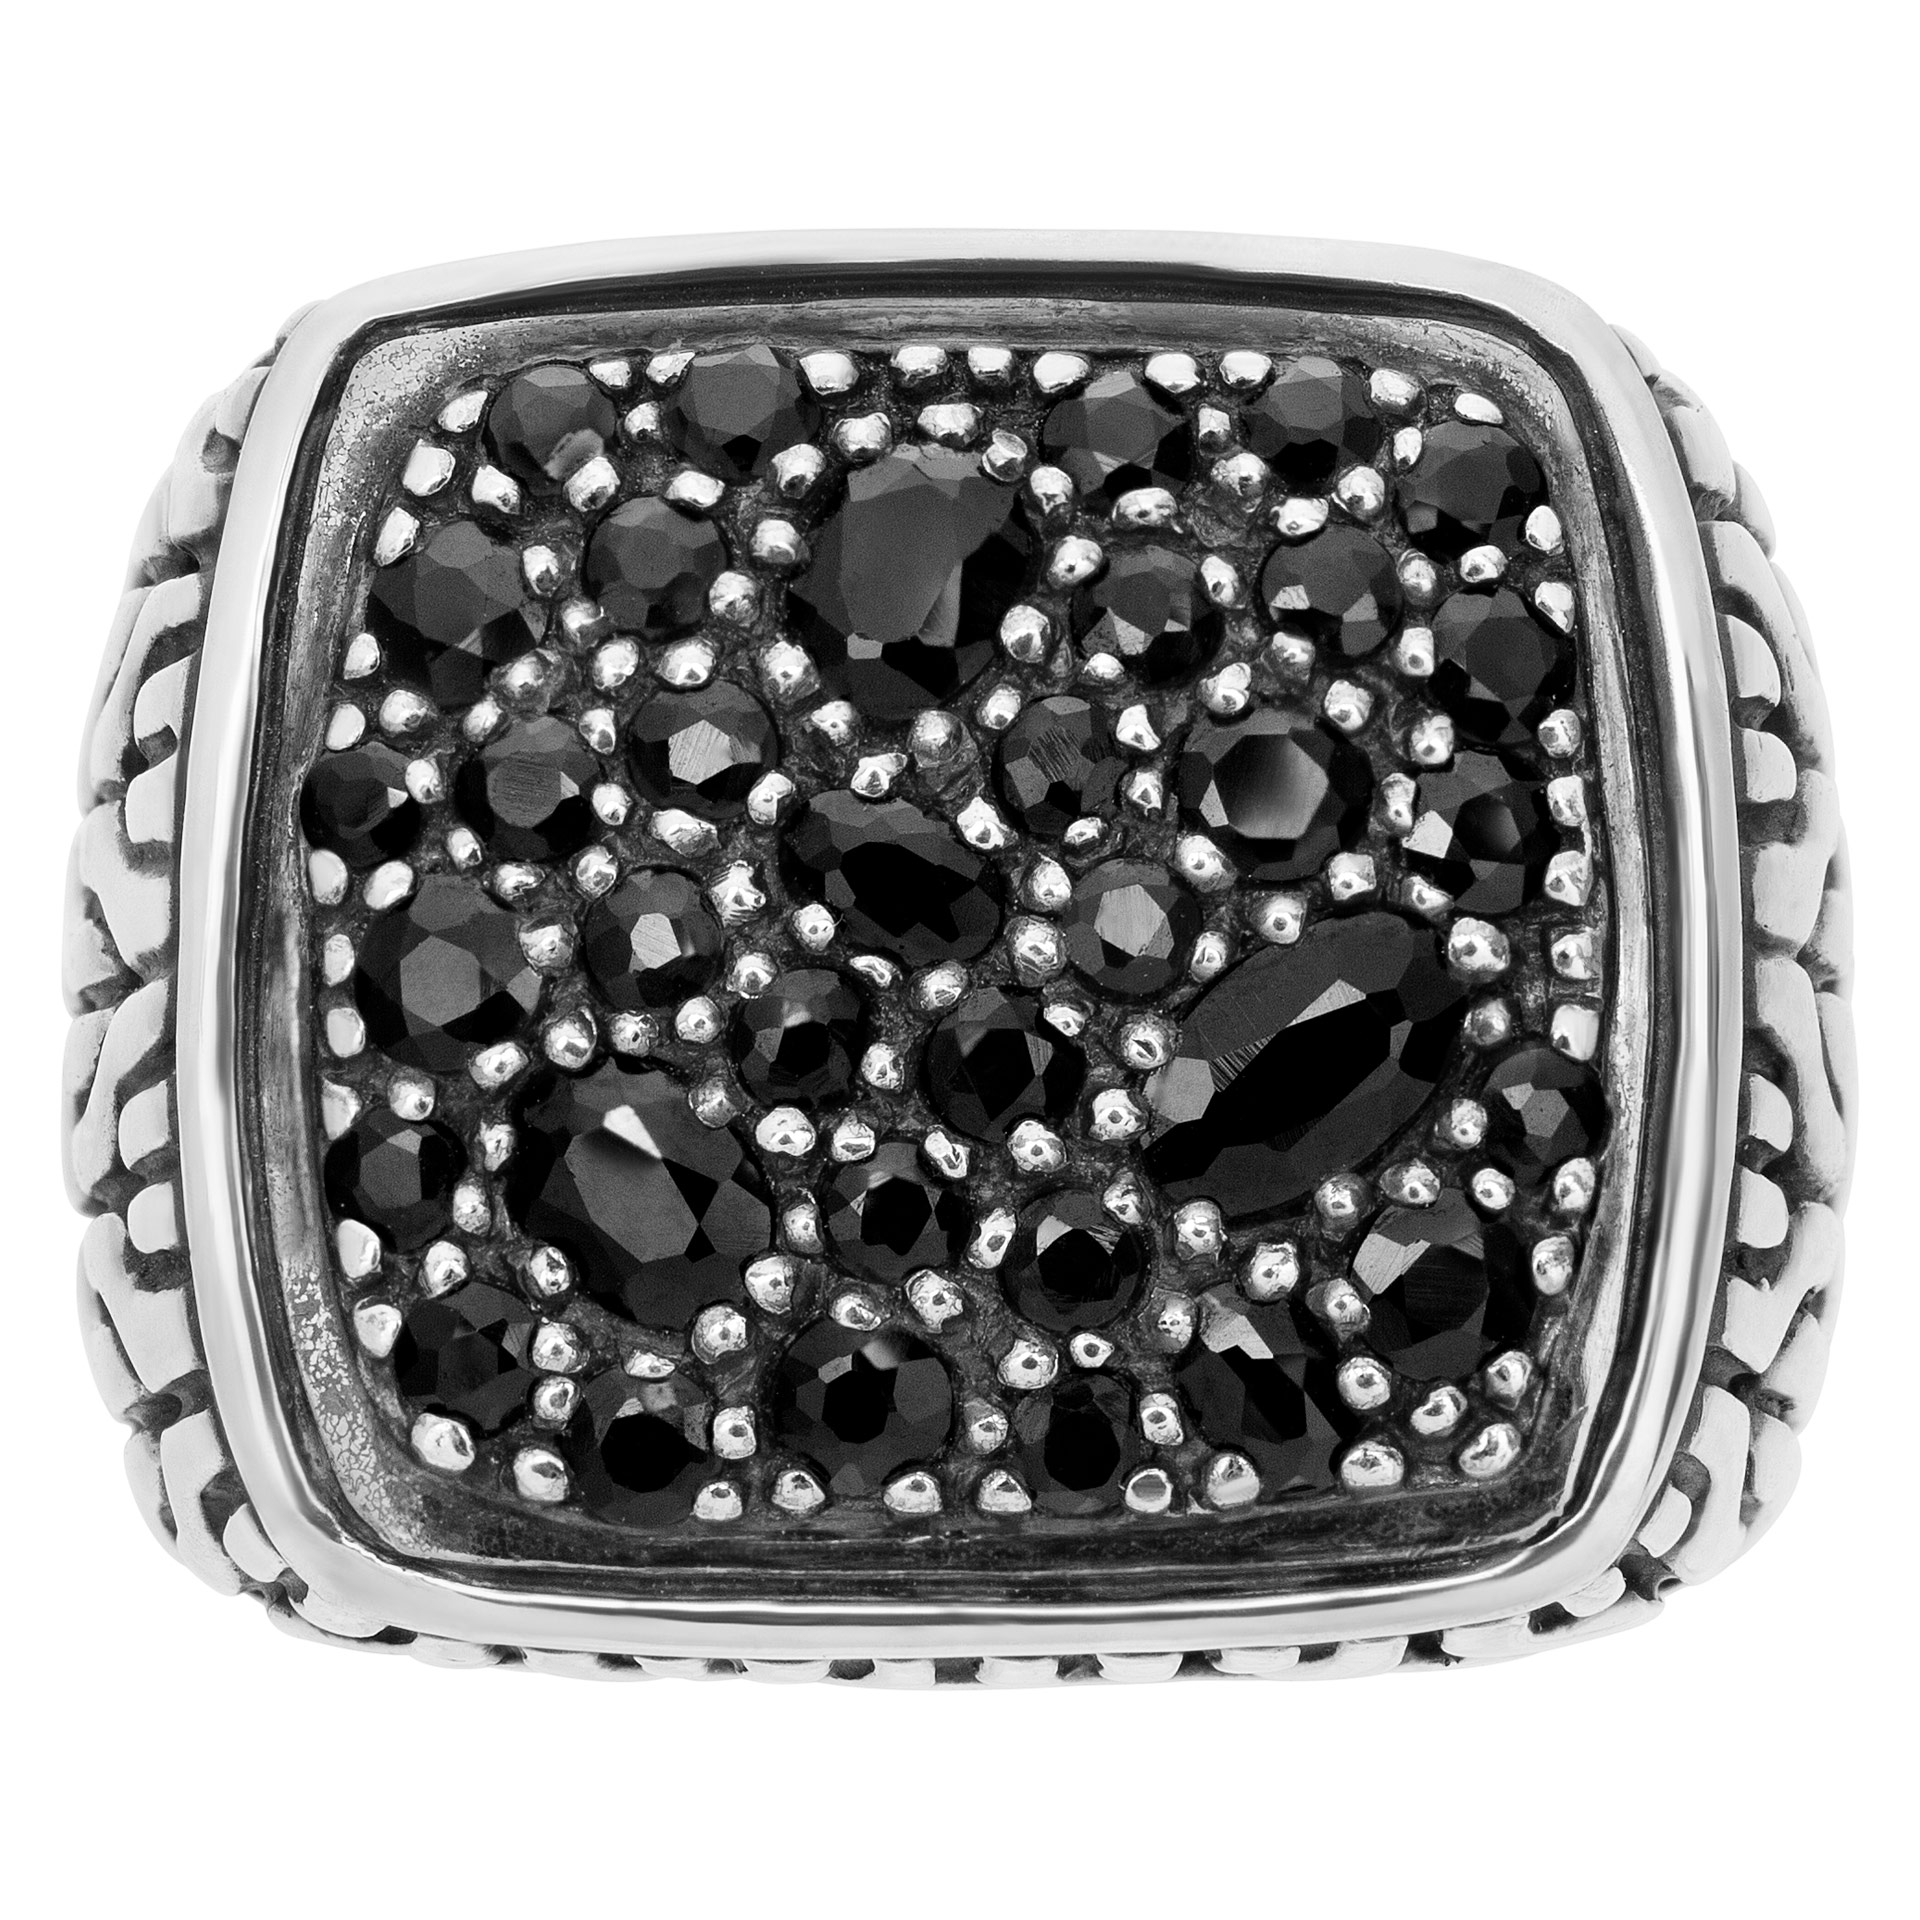 John Hardy classic chain black sapphire signet ring in sterling silver image 1